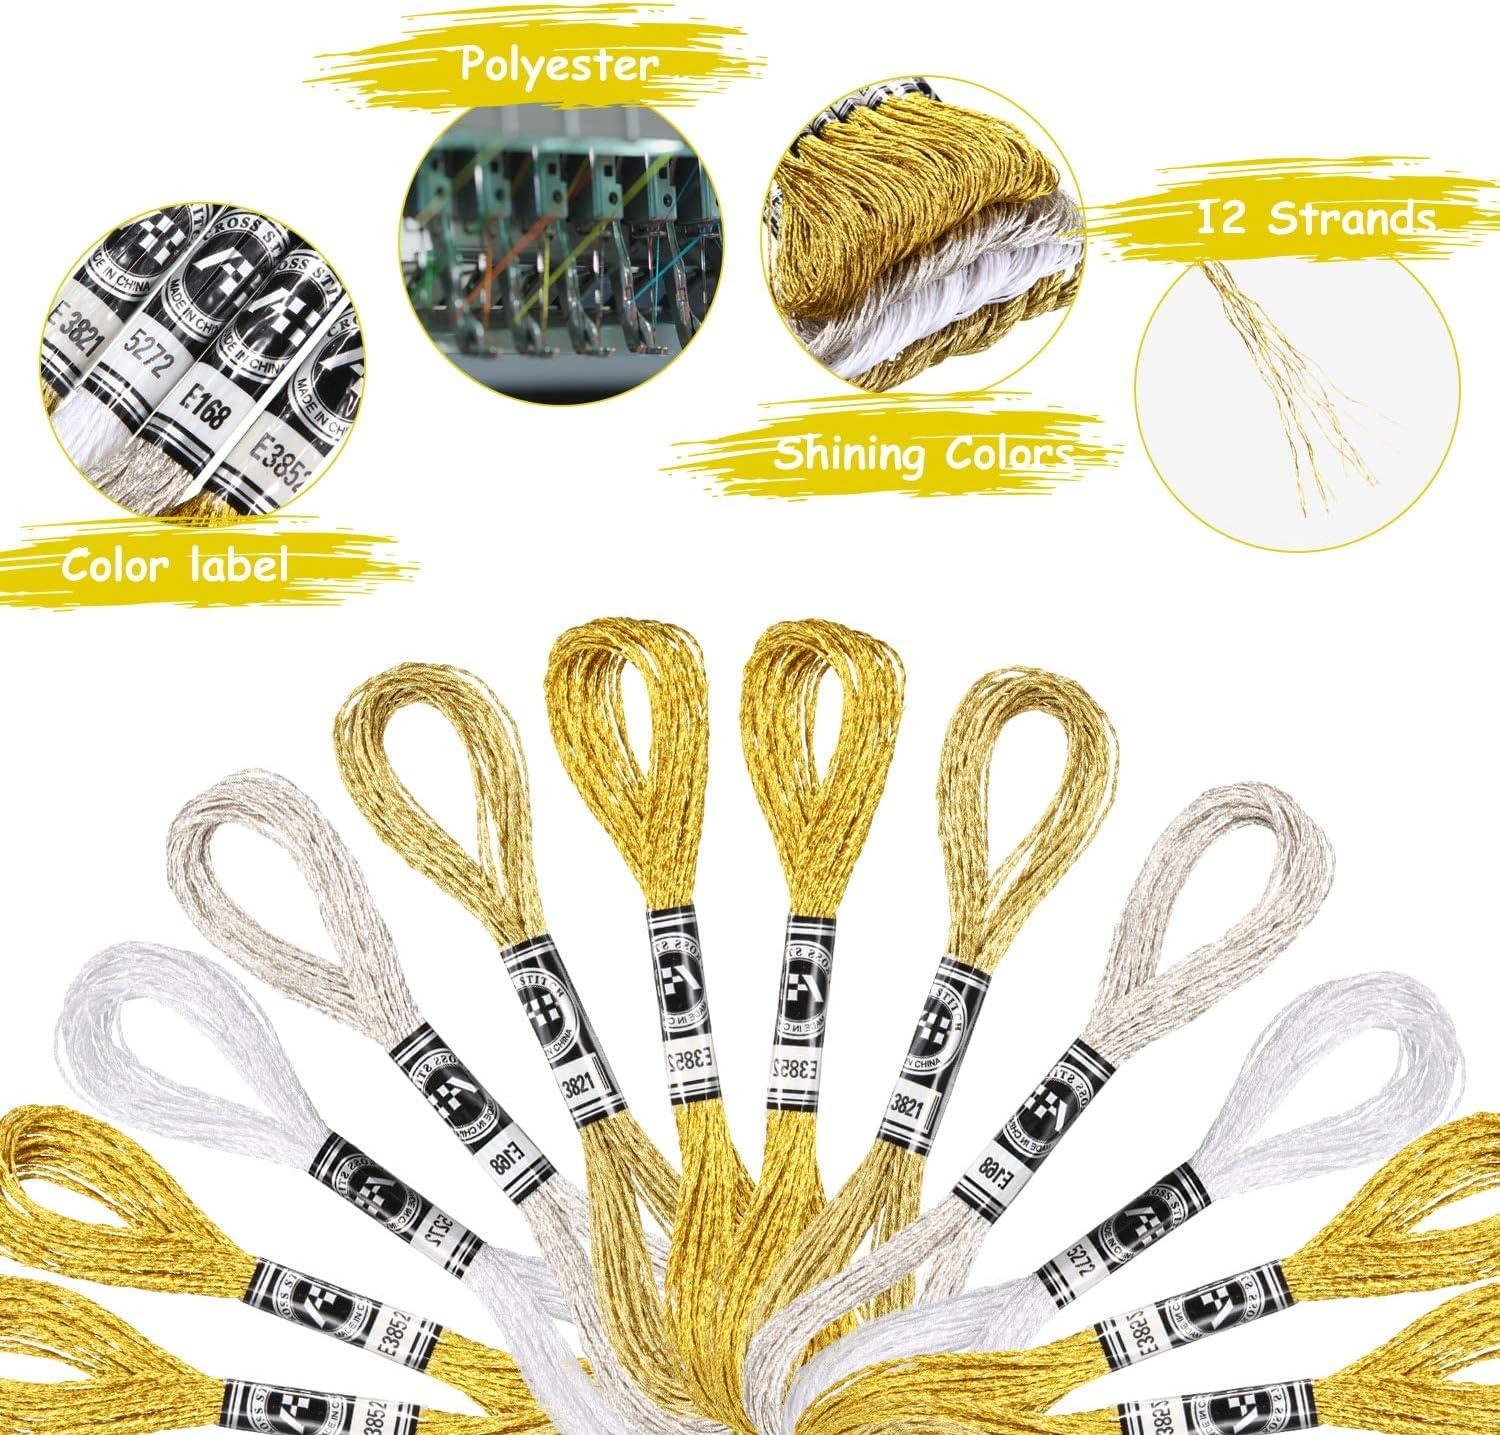 24 Pieces Metallic Embroidery Floss Multicolor Embroidery Skein